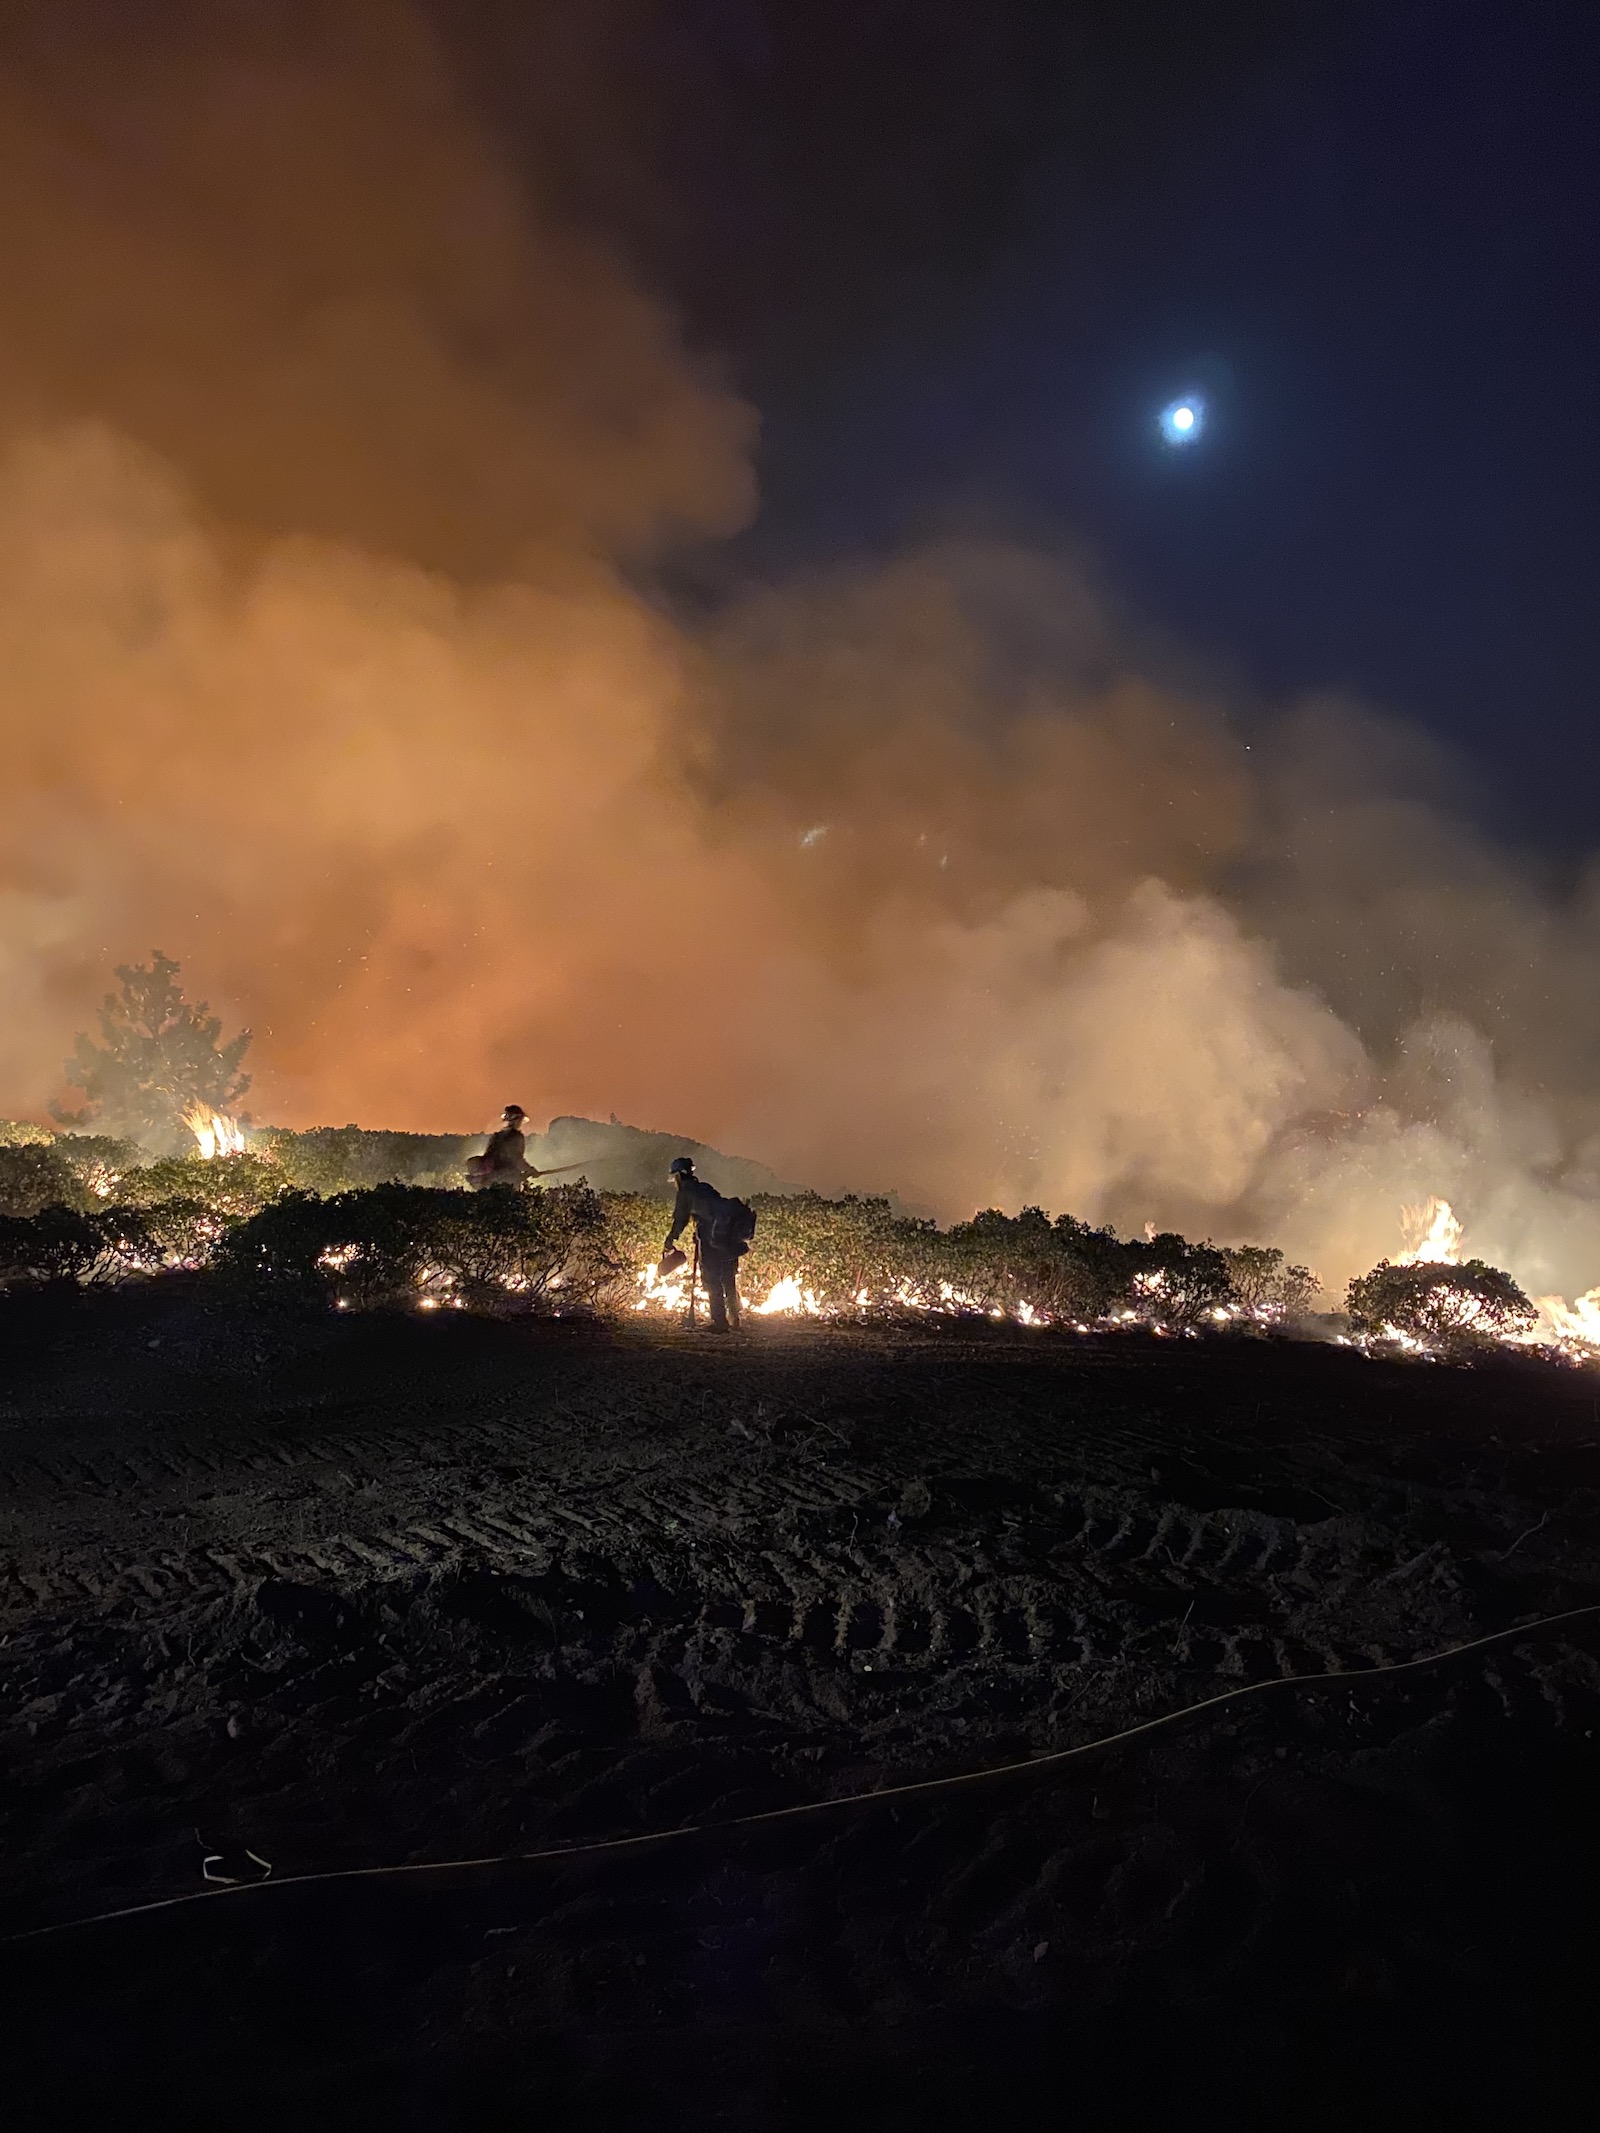 a photo of a firefighting crew at work at night under a smoky moonlit sky